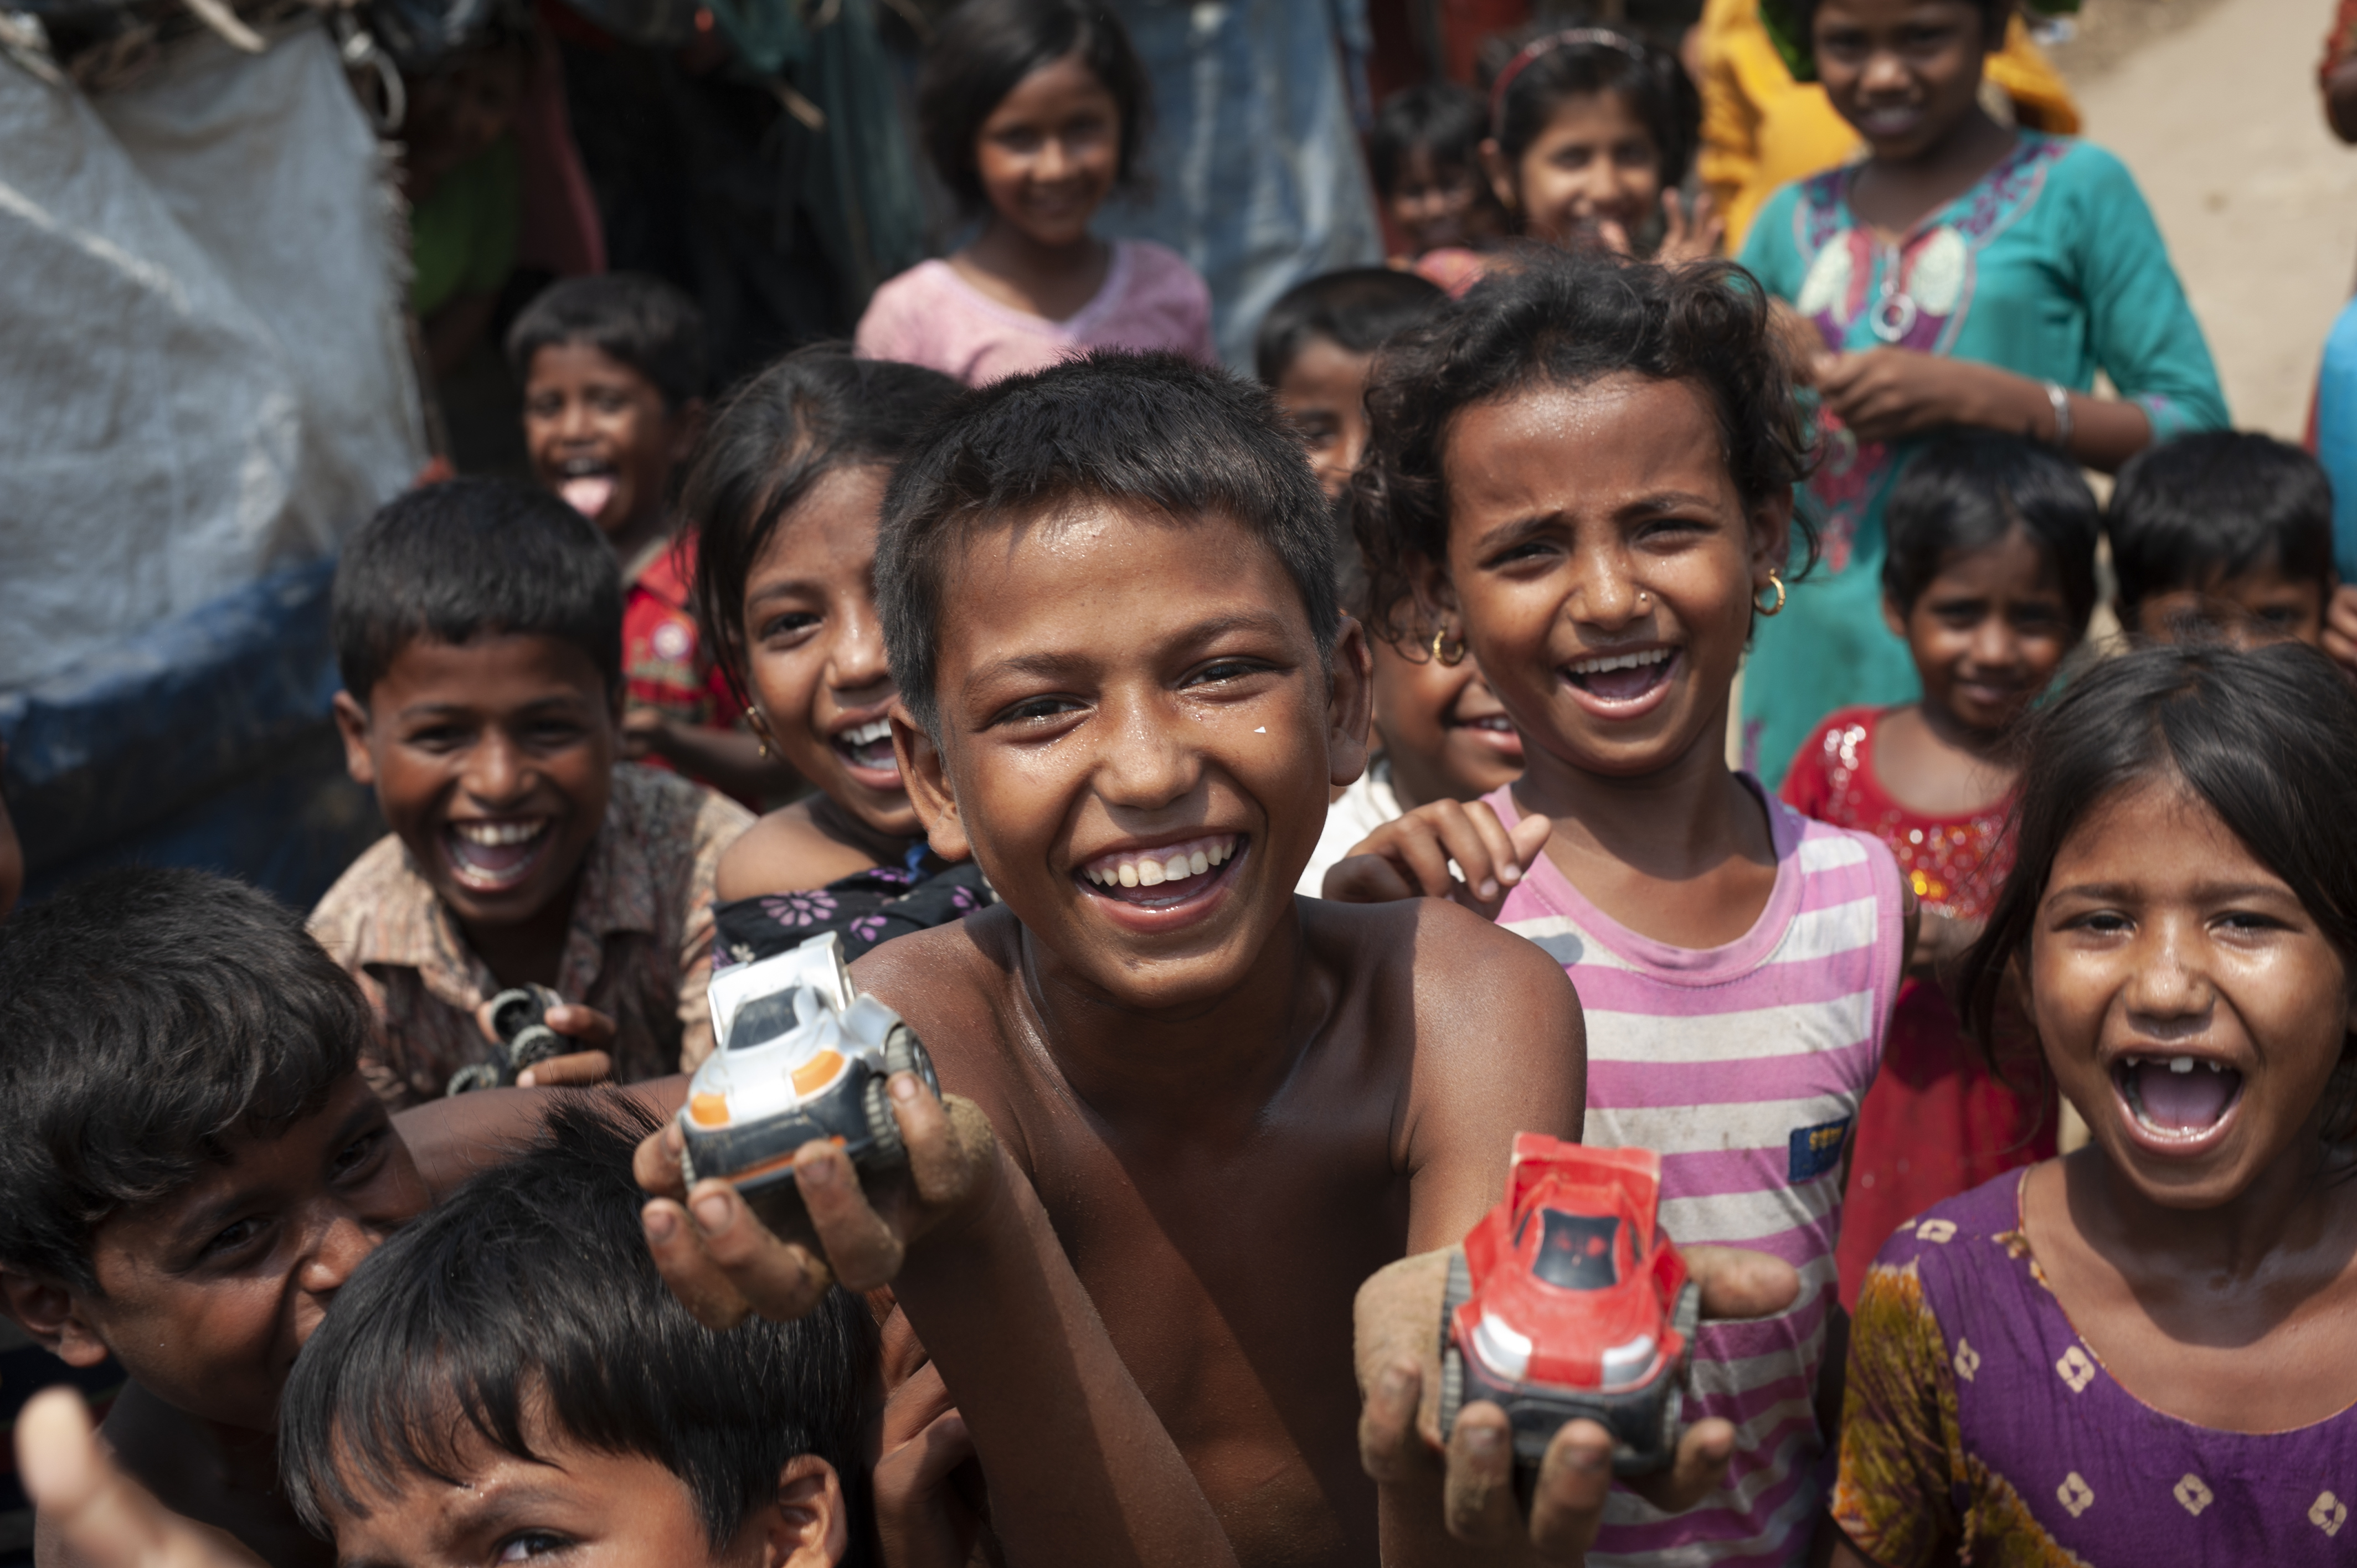 Mohammad Rifat, 12, (shirtless, center) and his friends race toy cars down a sandy stretch of trail in Shamlapur camp, Cox's Bazar District, Bangladesh on April 22 2018